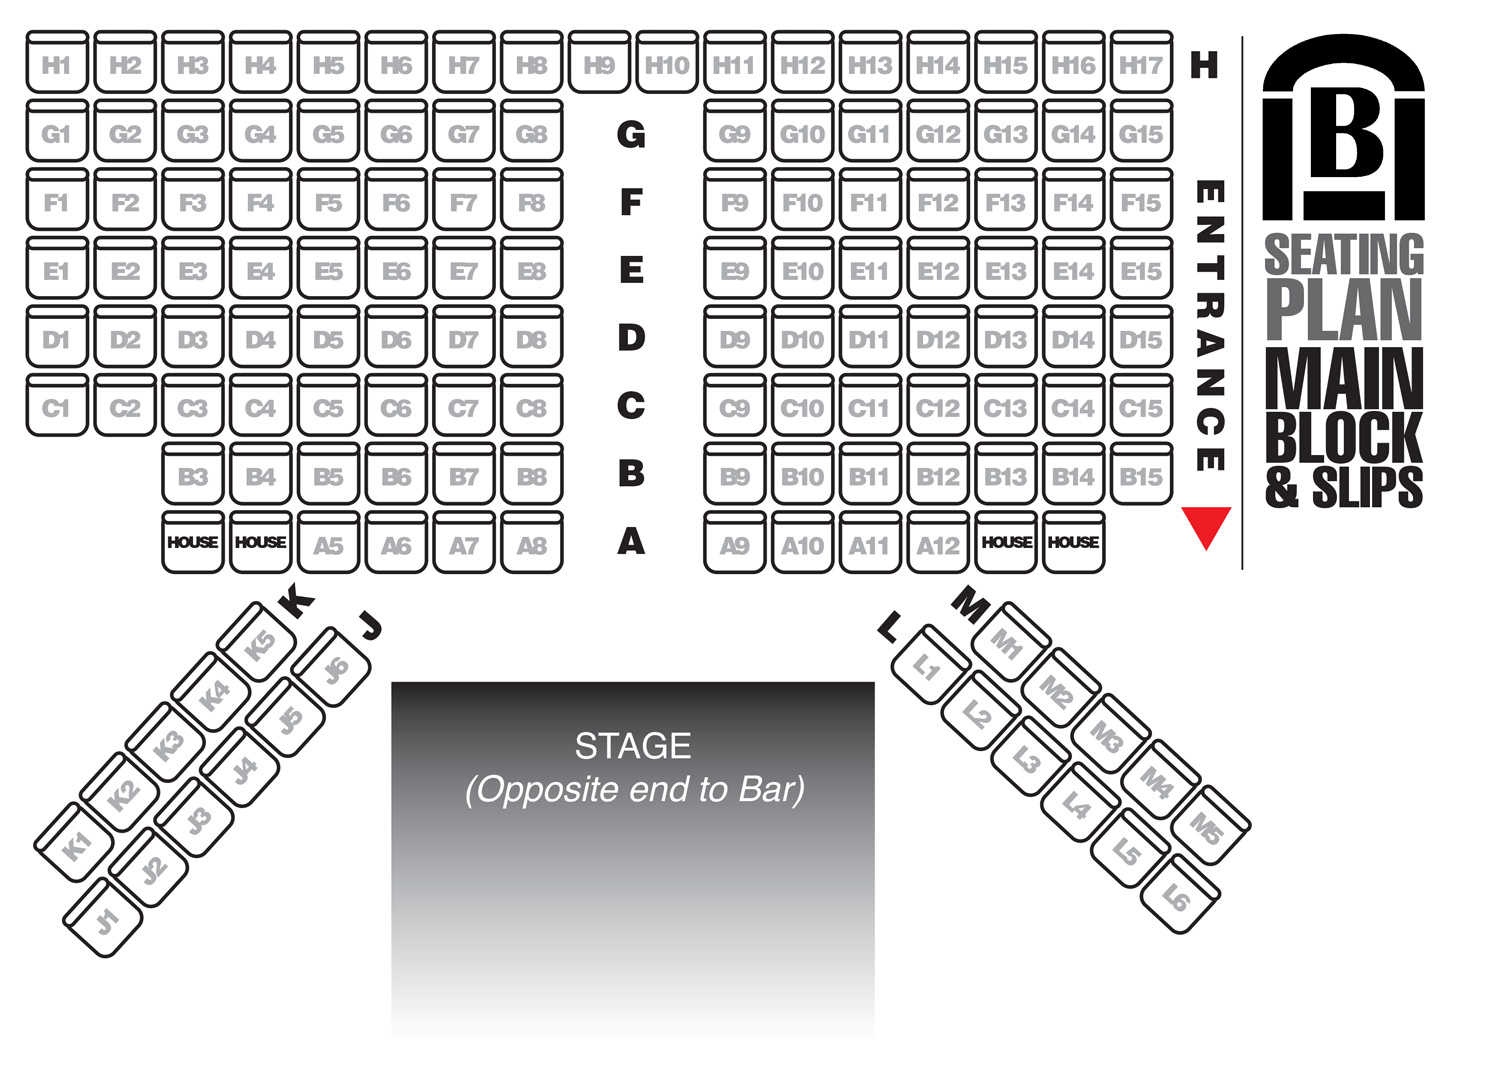 727445#Seating Plan Main Block NEW With Slips 